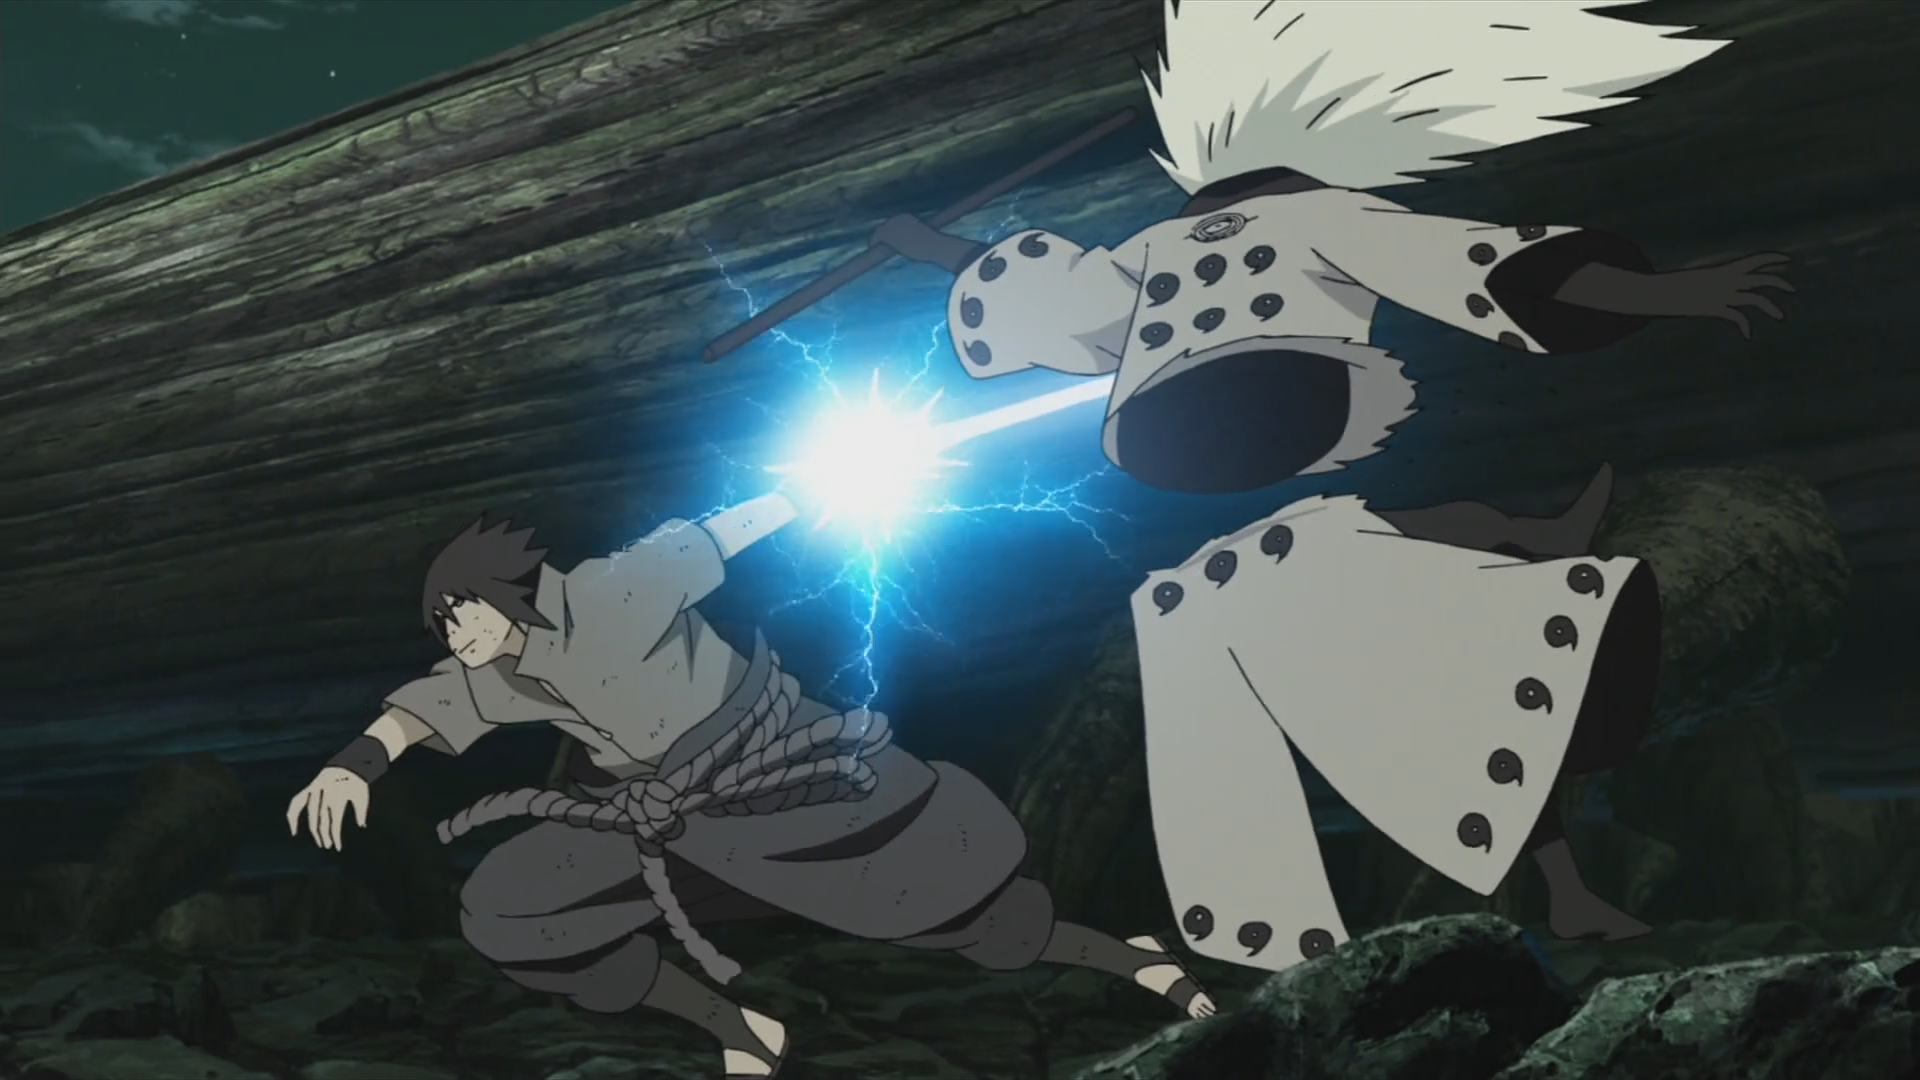 http://vignette3.wikia.nocookie.net/naruto/images/e/ee/Madara_Cut_In_Half.png/revision/latest?cb=20150813123029